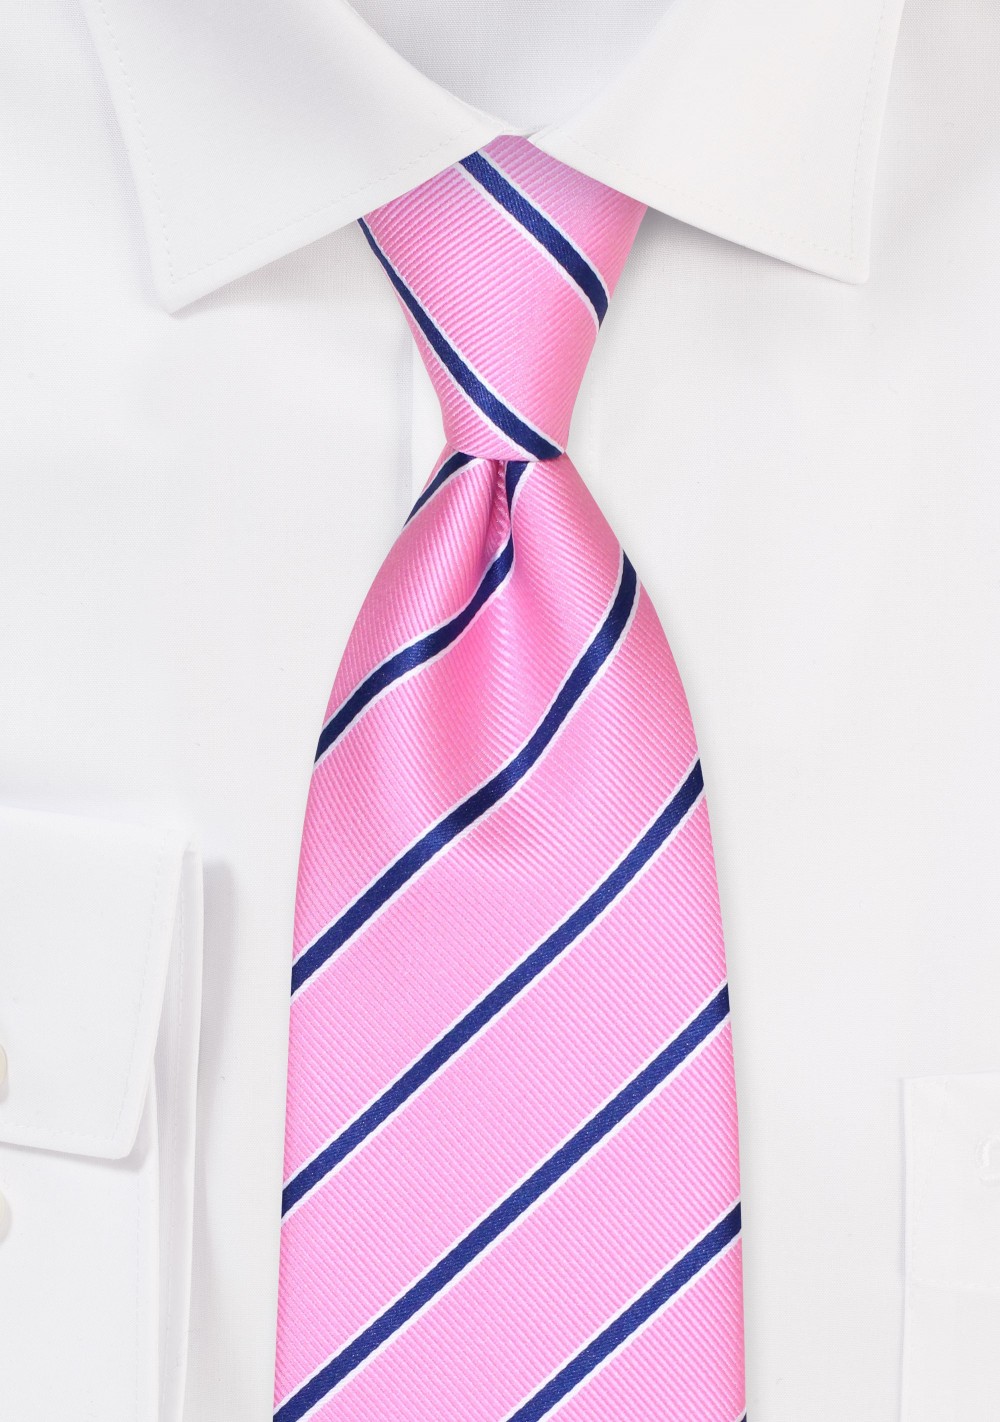 Pink Repp Tie in Extra Long Length